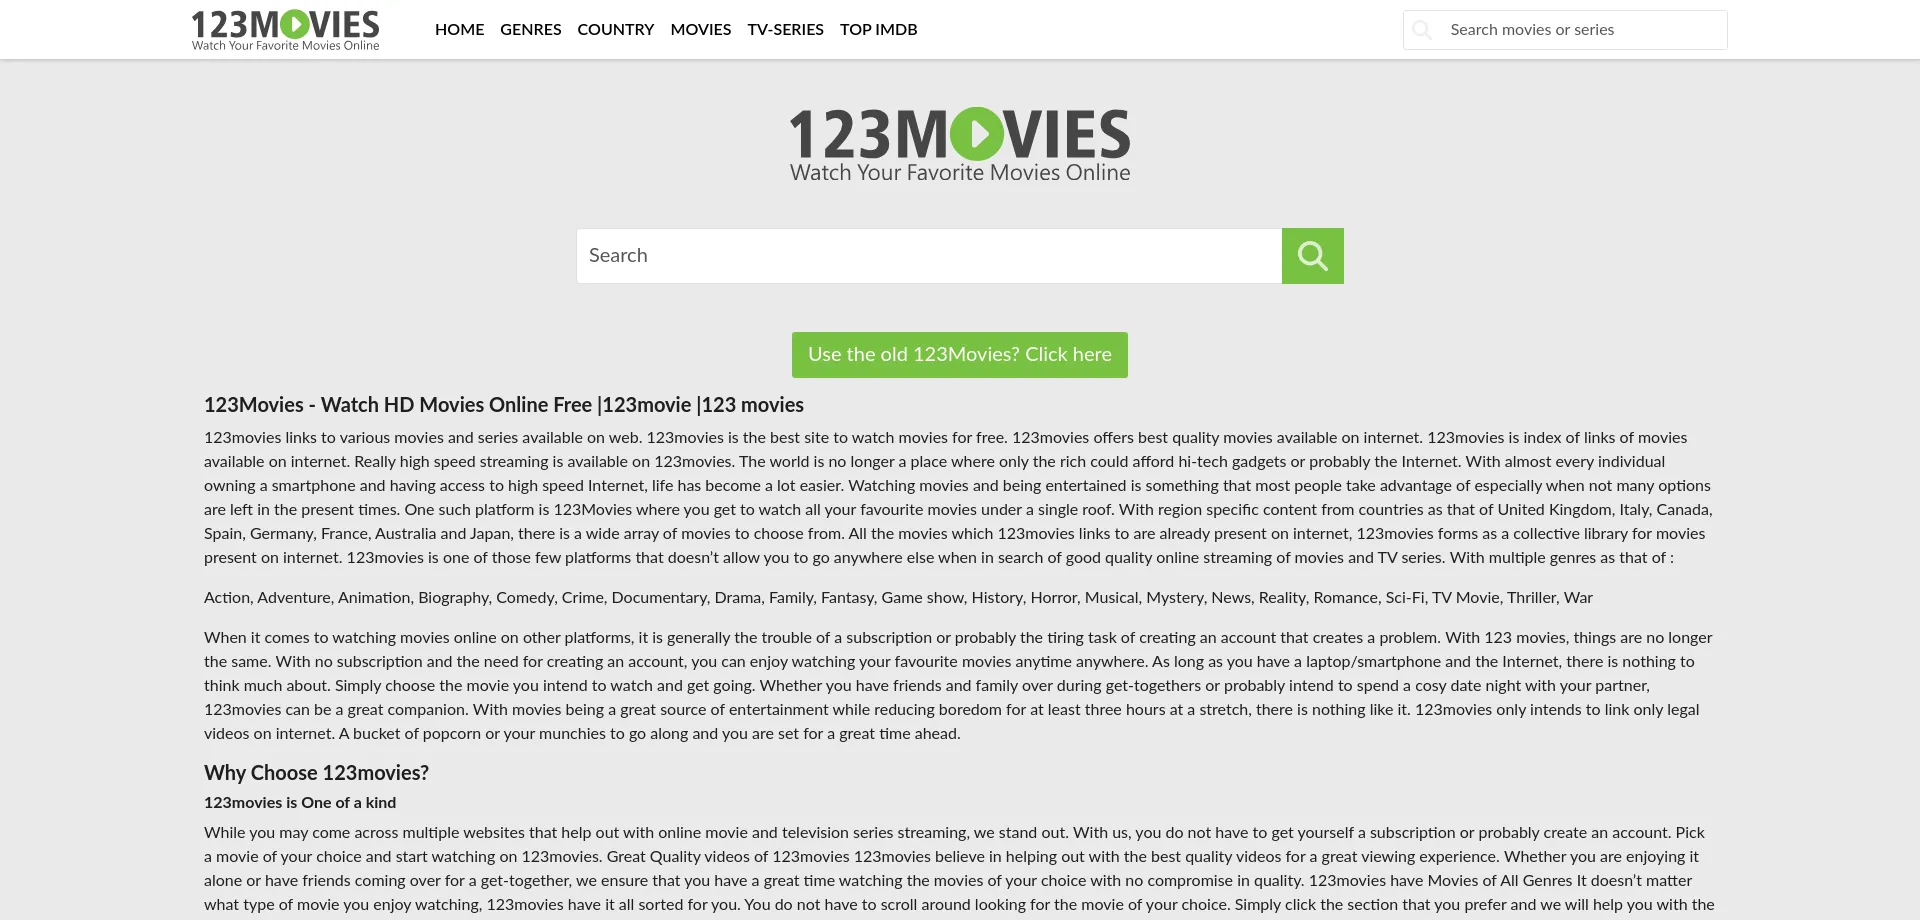 What is 123moviesfree?